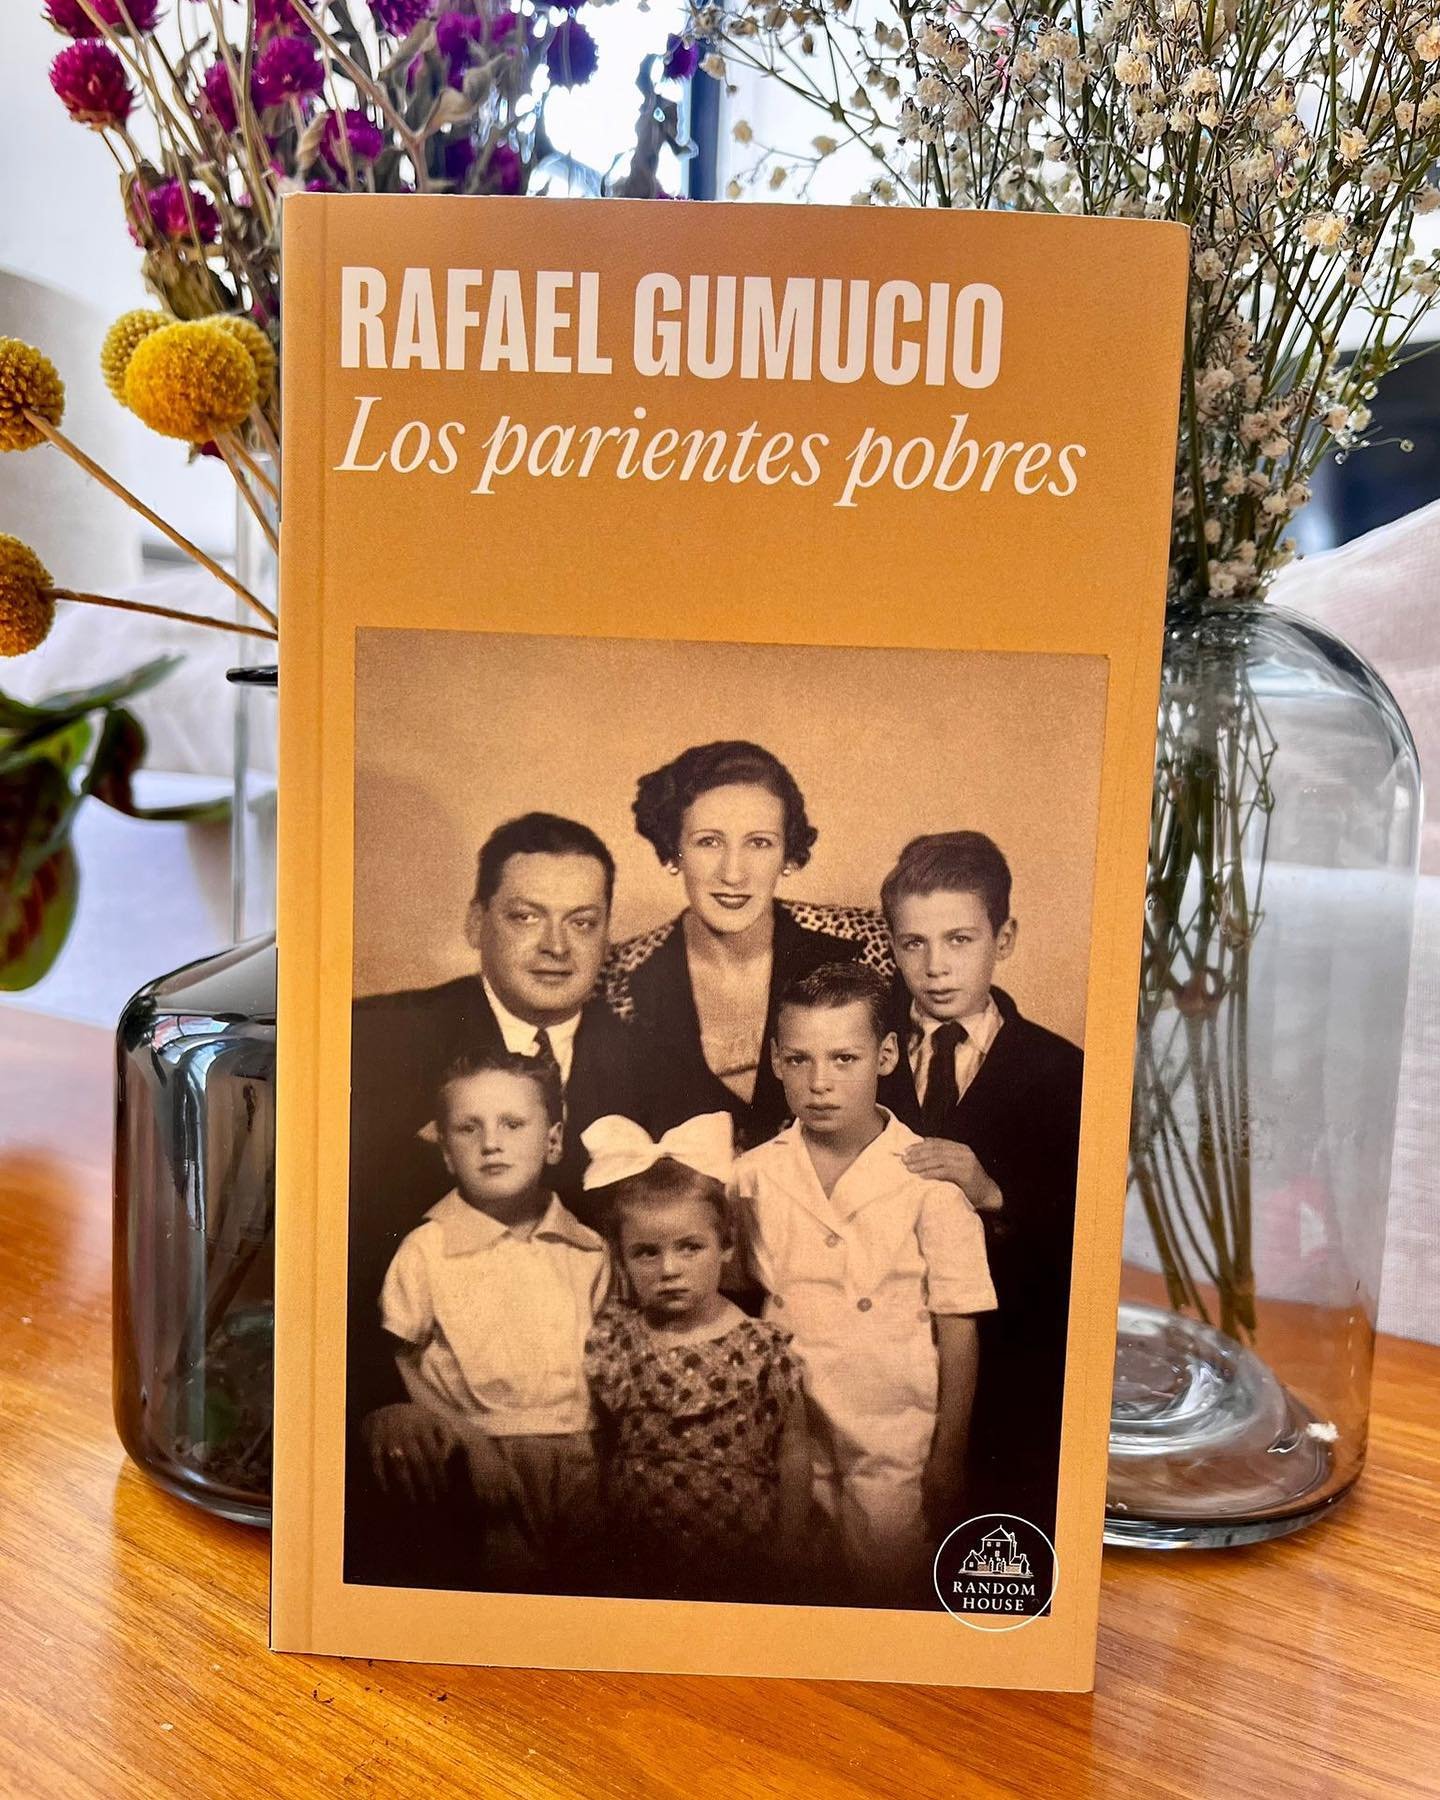 Rafael Gumucio&rsquo;s new novel LOS PARIENTES POBRES is out now with @penguinlibroscl! 🎉

Eleven brothers exchange messages about the situation regarding their father, who in his old age is forging scandalous connections and exhibiting behavior tha